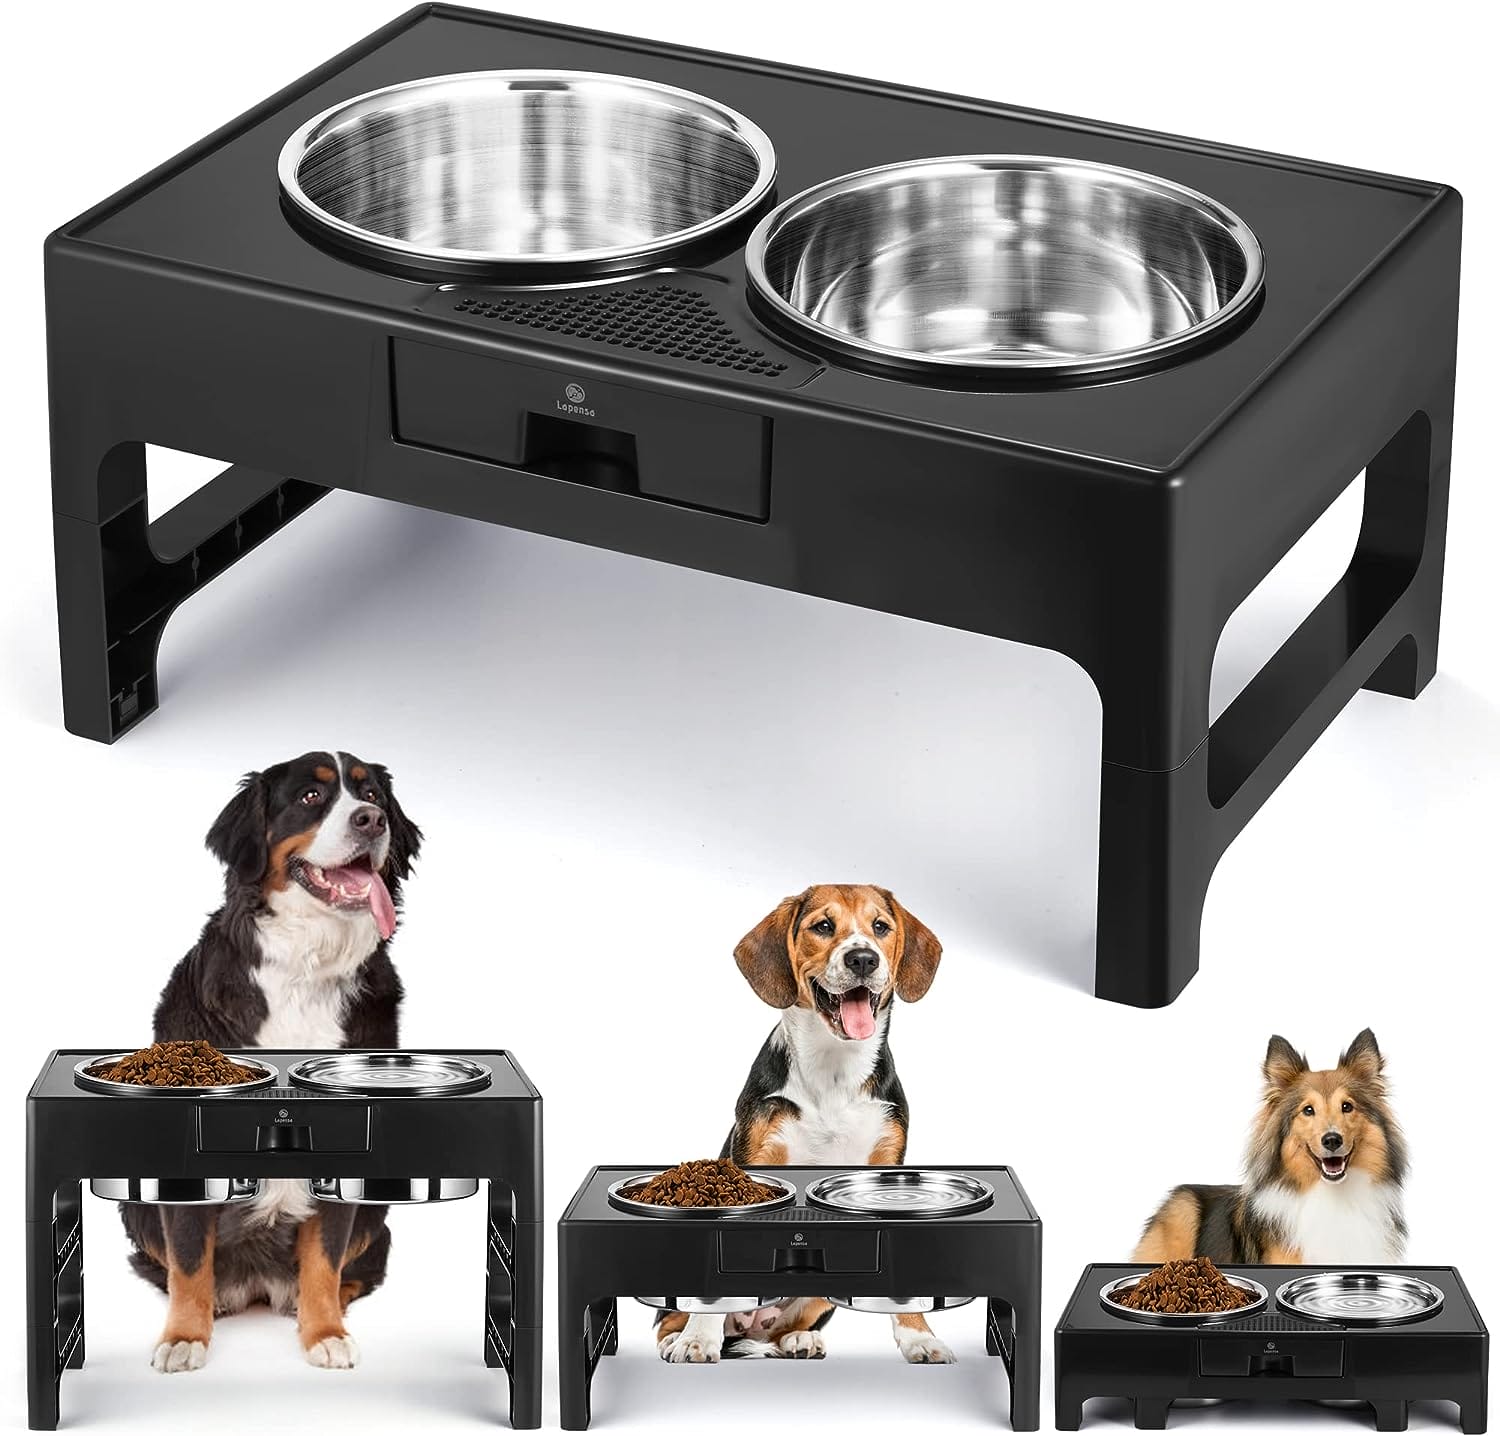 Stainless Steel Raised Dog Deep Bowl with Stand Review